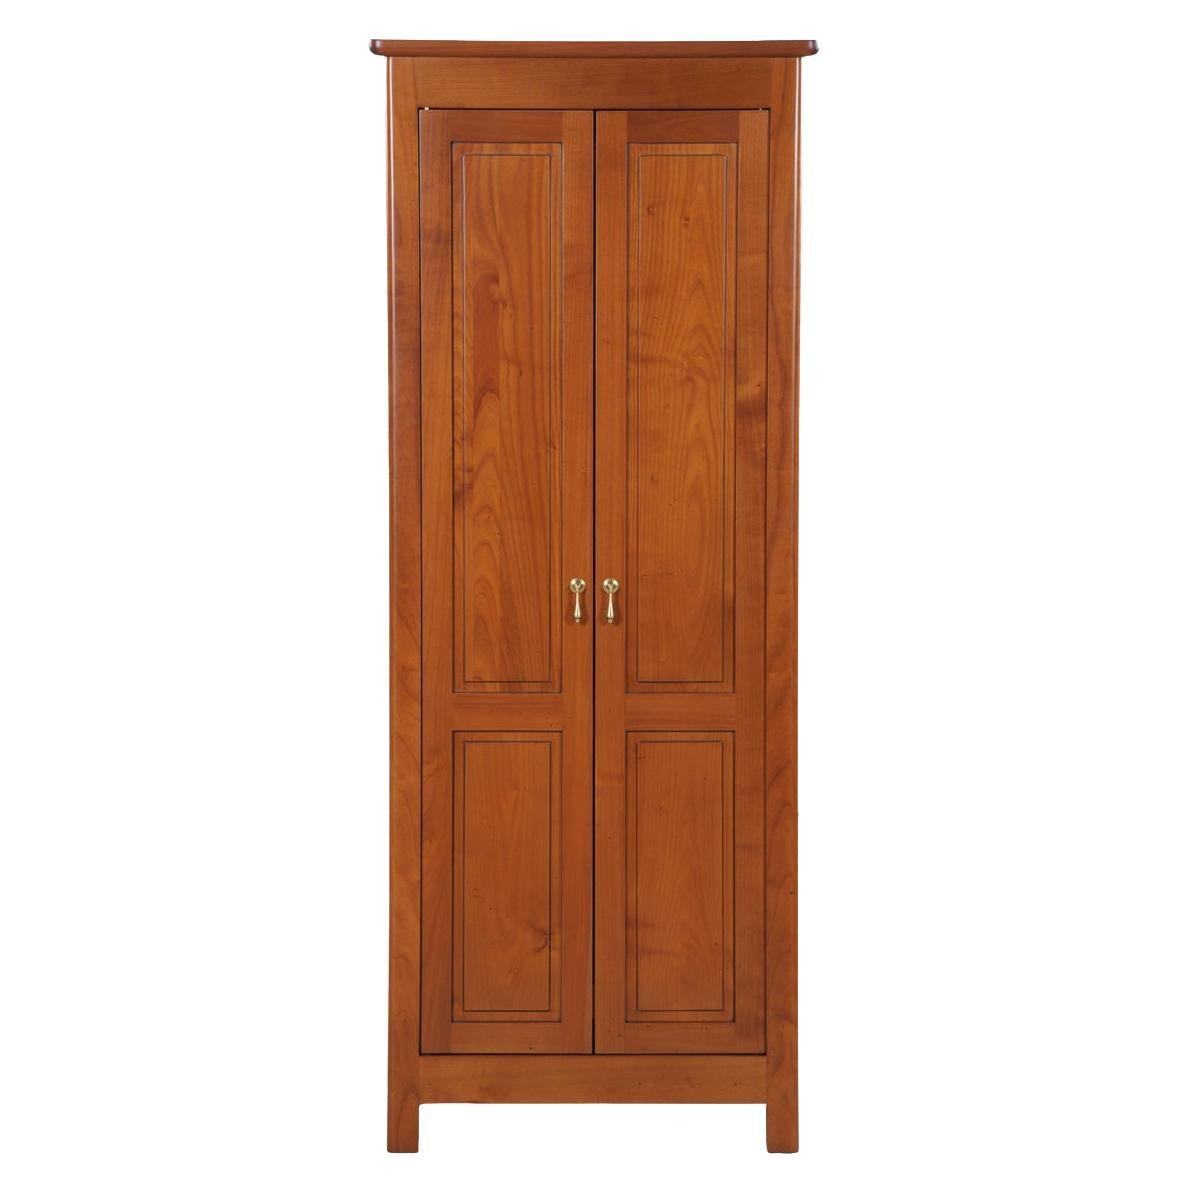 French Armoirette Cabinet with 1 folding Door in solid stained cherry wood